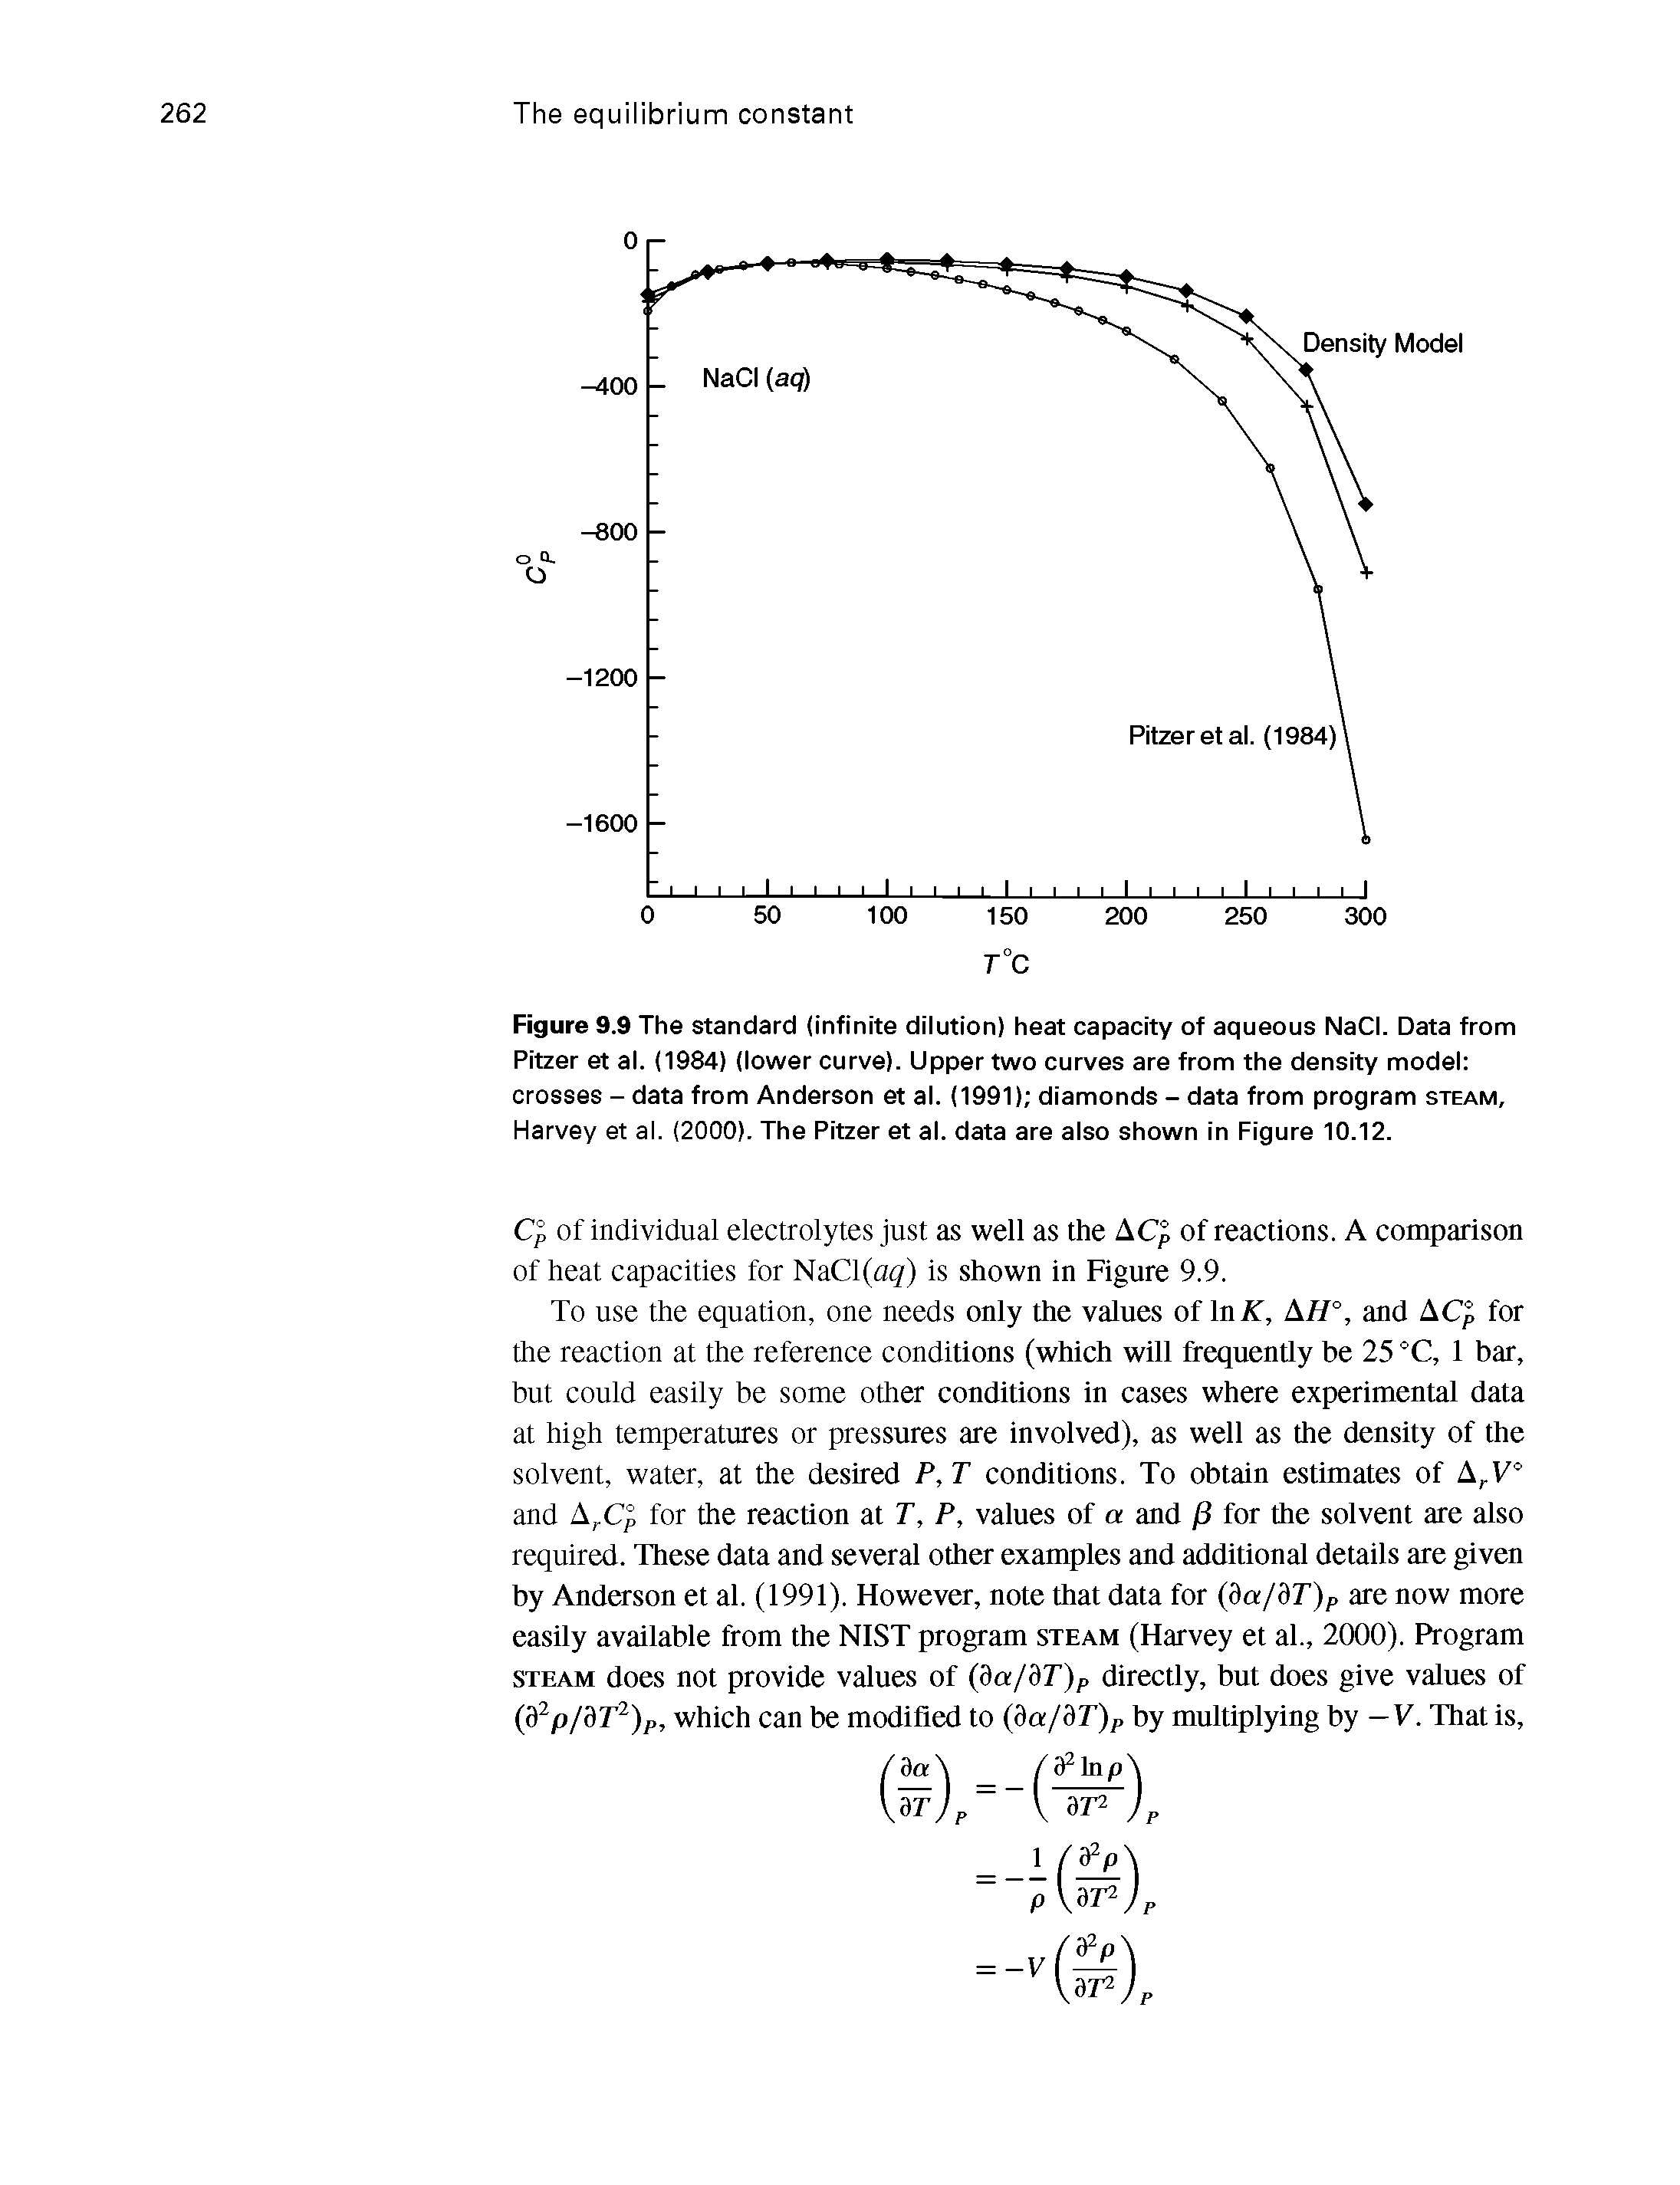 Figure 9.9 The standard (infinite diiution) heat capacity of aqueous NaCI. Data from Pitzer et ai. (1984) (iower curve). Upper two curves are from the density model crosses - data from Anderson et al. (1991) diamonds - data from program steam, Harvey et al. (2000). The Pitzer et al. data are also shown in Figure 10.12.